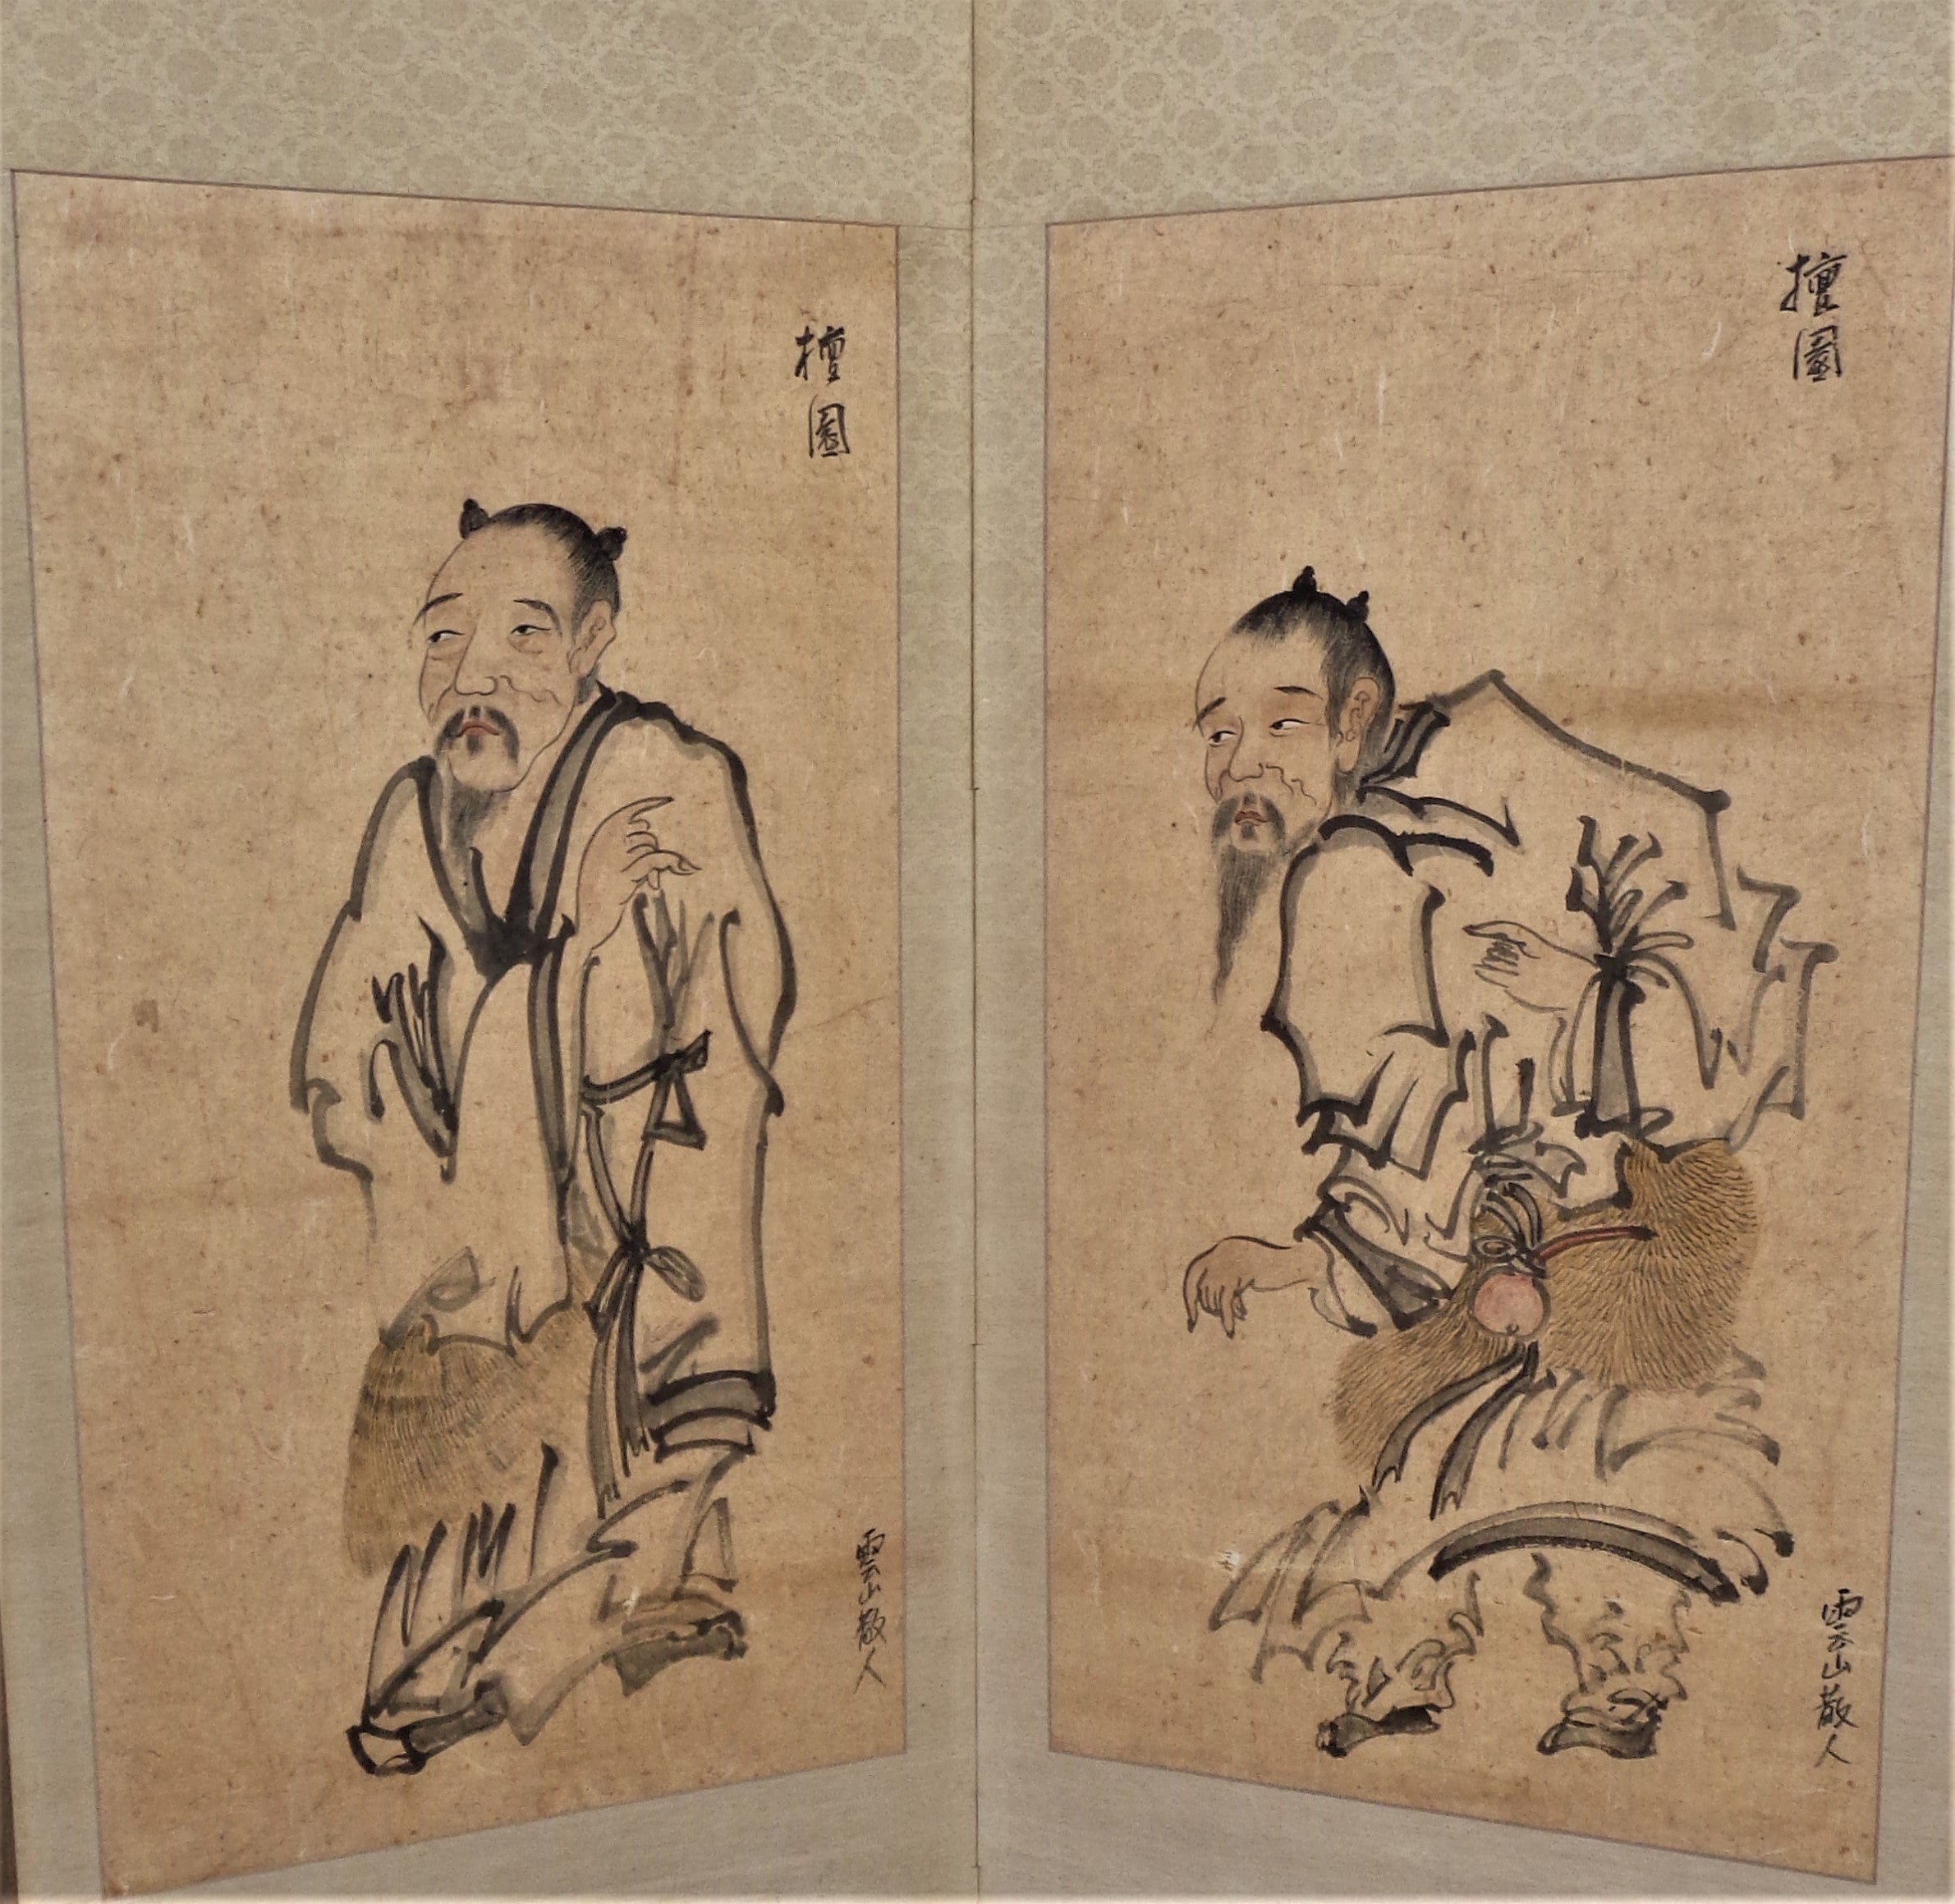 Antique Chinese artist signed ancestral scholar figure scroll paintings incorporated into a two panel grass cloth backed folding screen. The scroll paintings are matted with decorated Chinese silk fabric. The scroll paintings measures 36